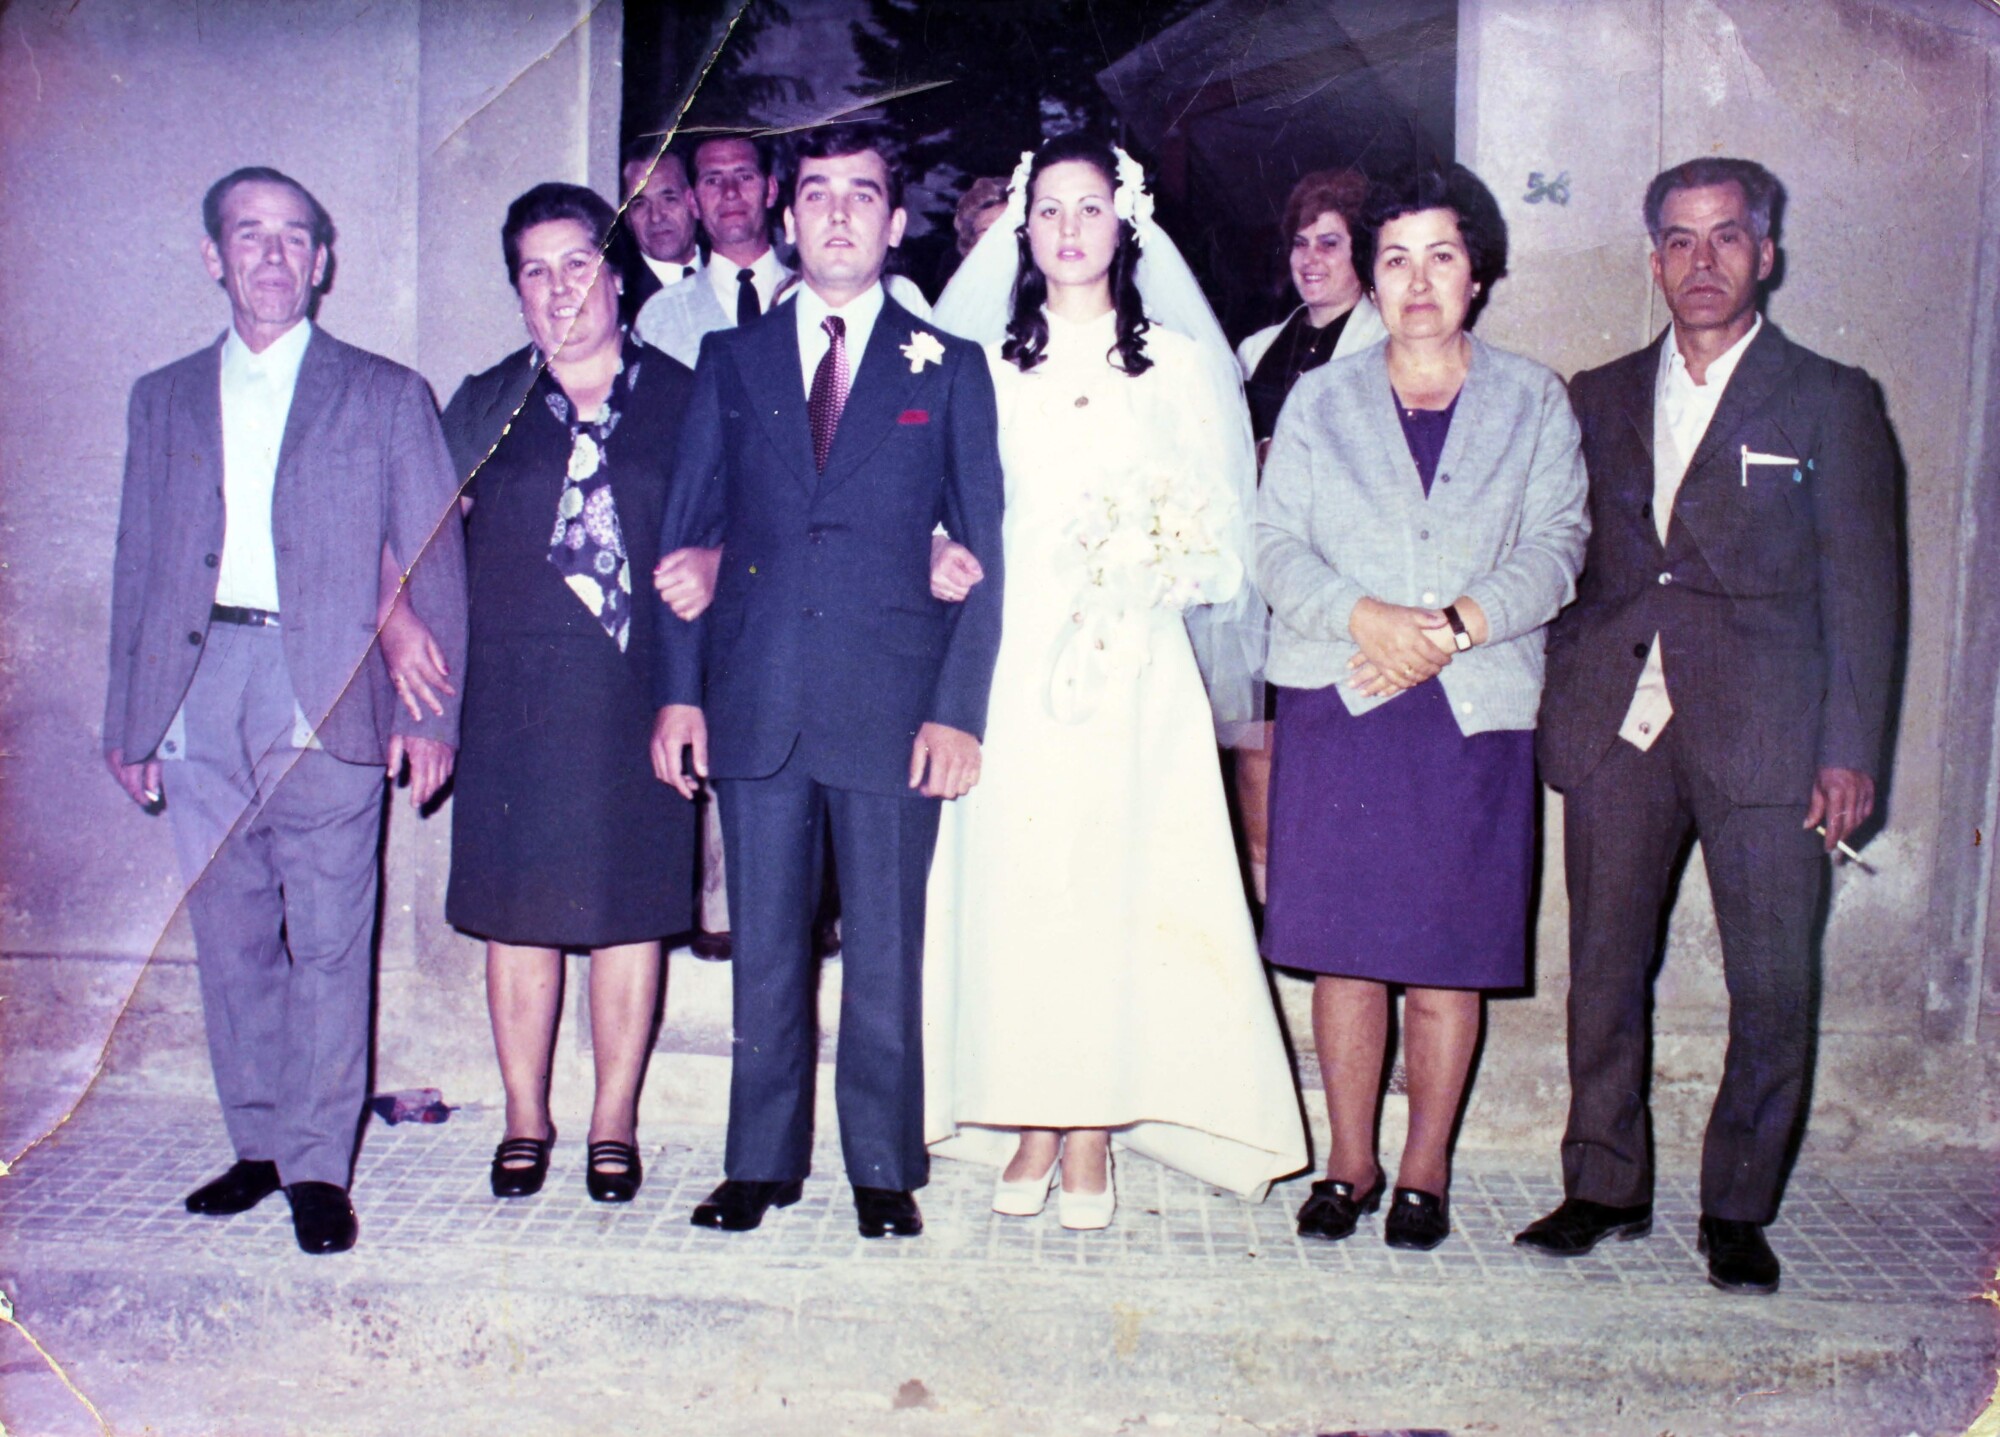 Photo of my aunt Carmen's wedding in 1971. From left to right: his husband's parents; his husband; my aunt Carmen; and her parents (my grandparents), María and Juan